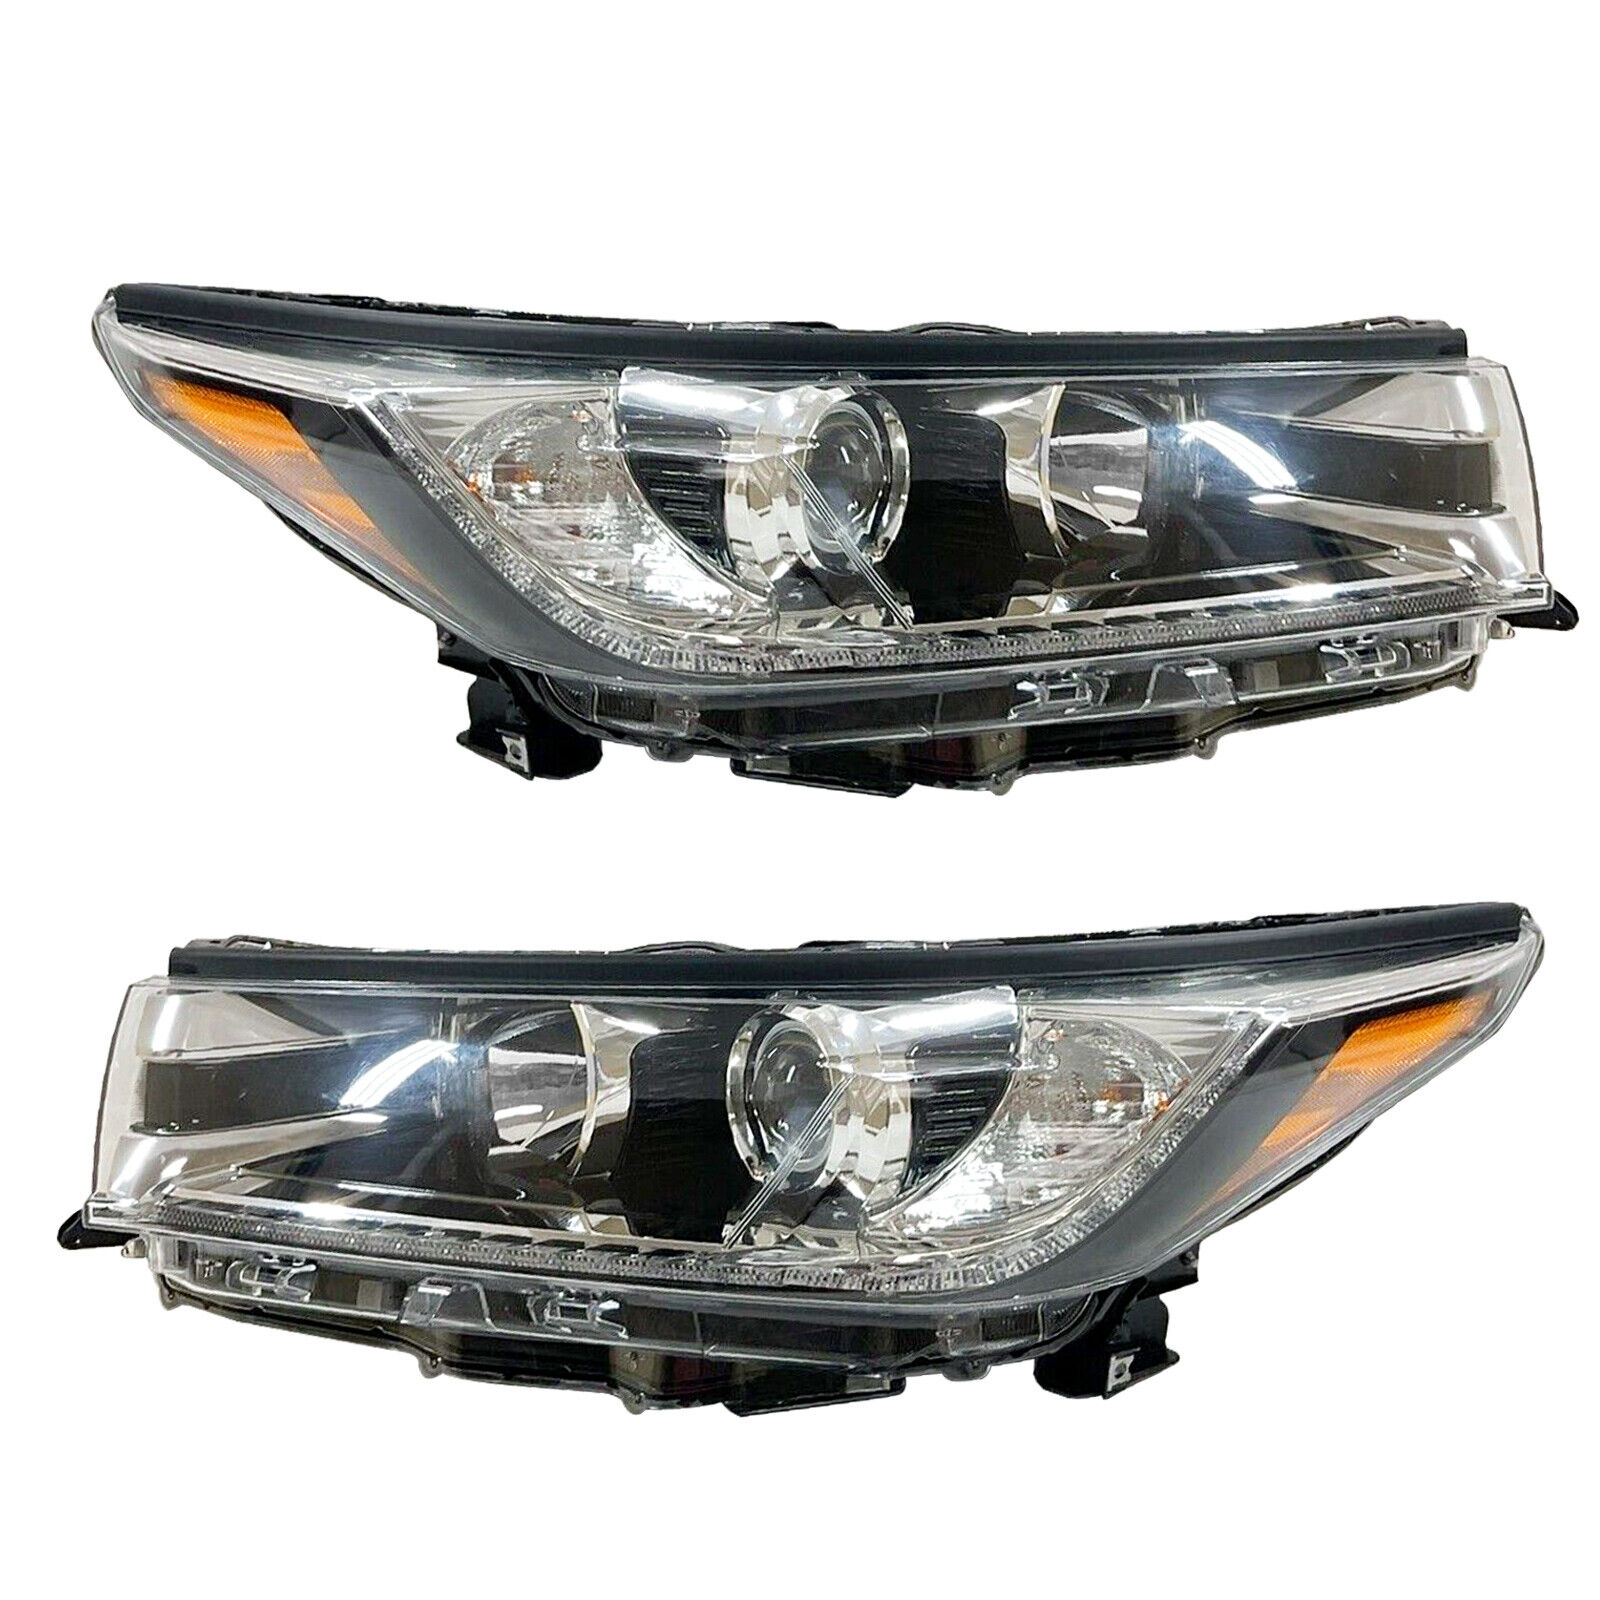 1Pair of LED DRL Headlights Assembly For 2017 2018 2019 Toyota Highlander LE XLE